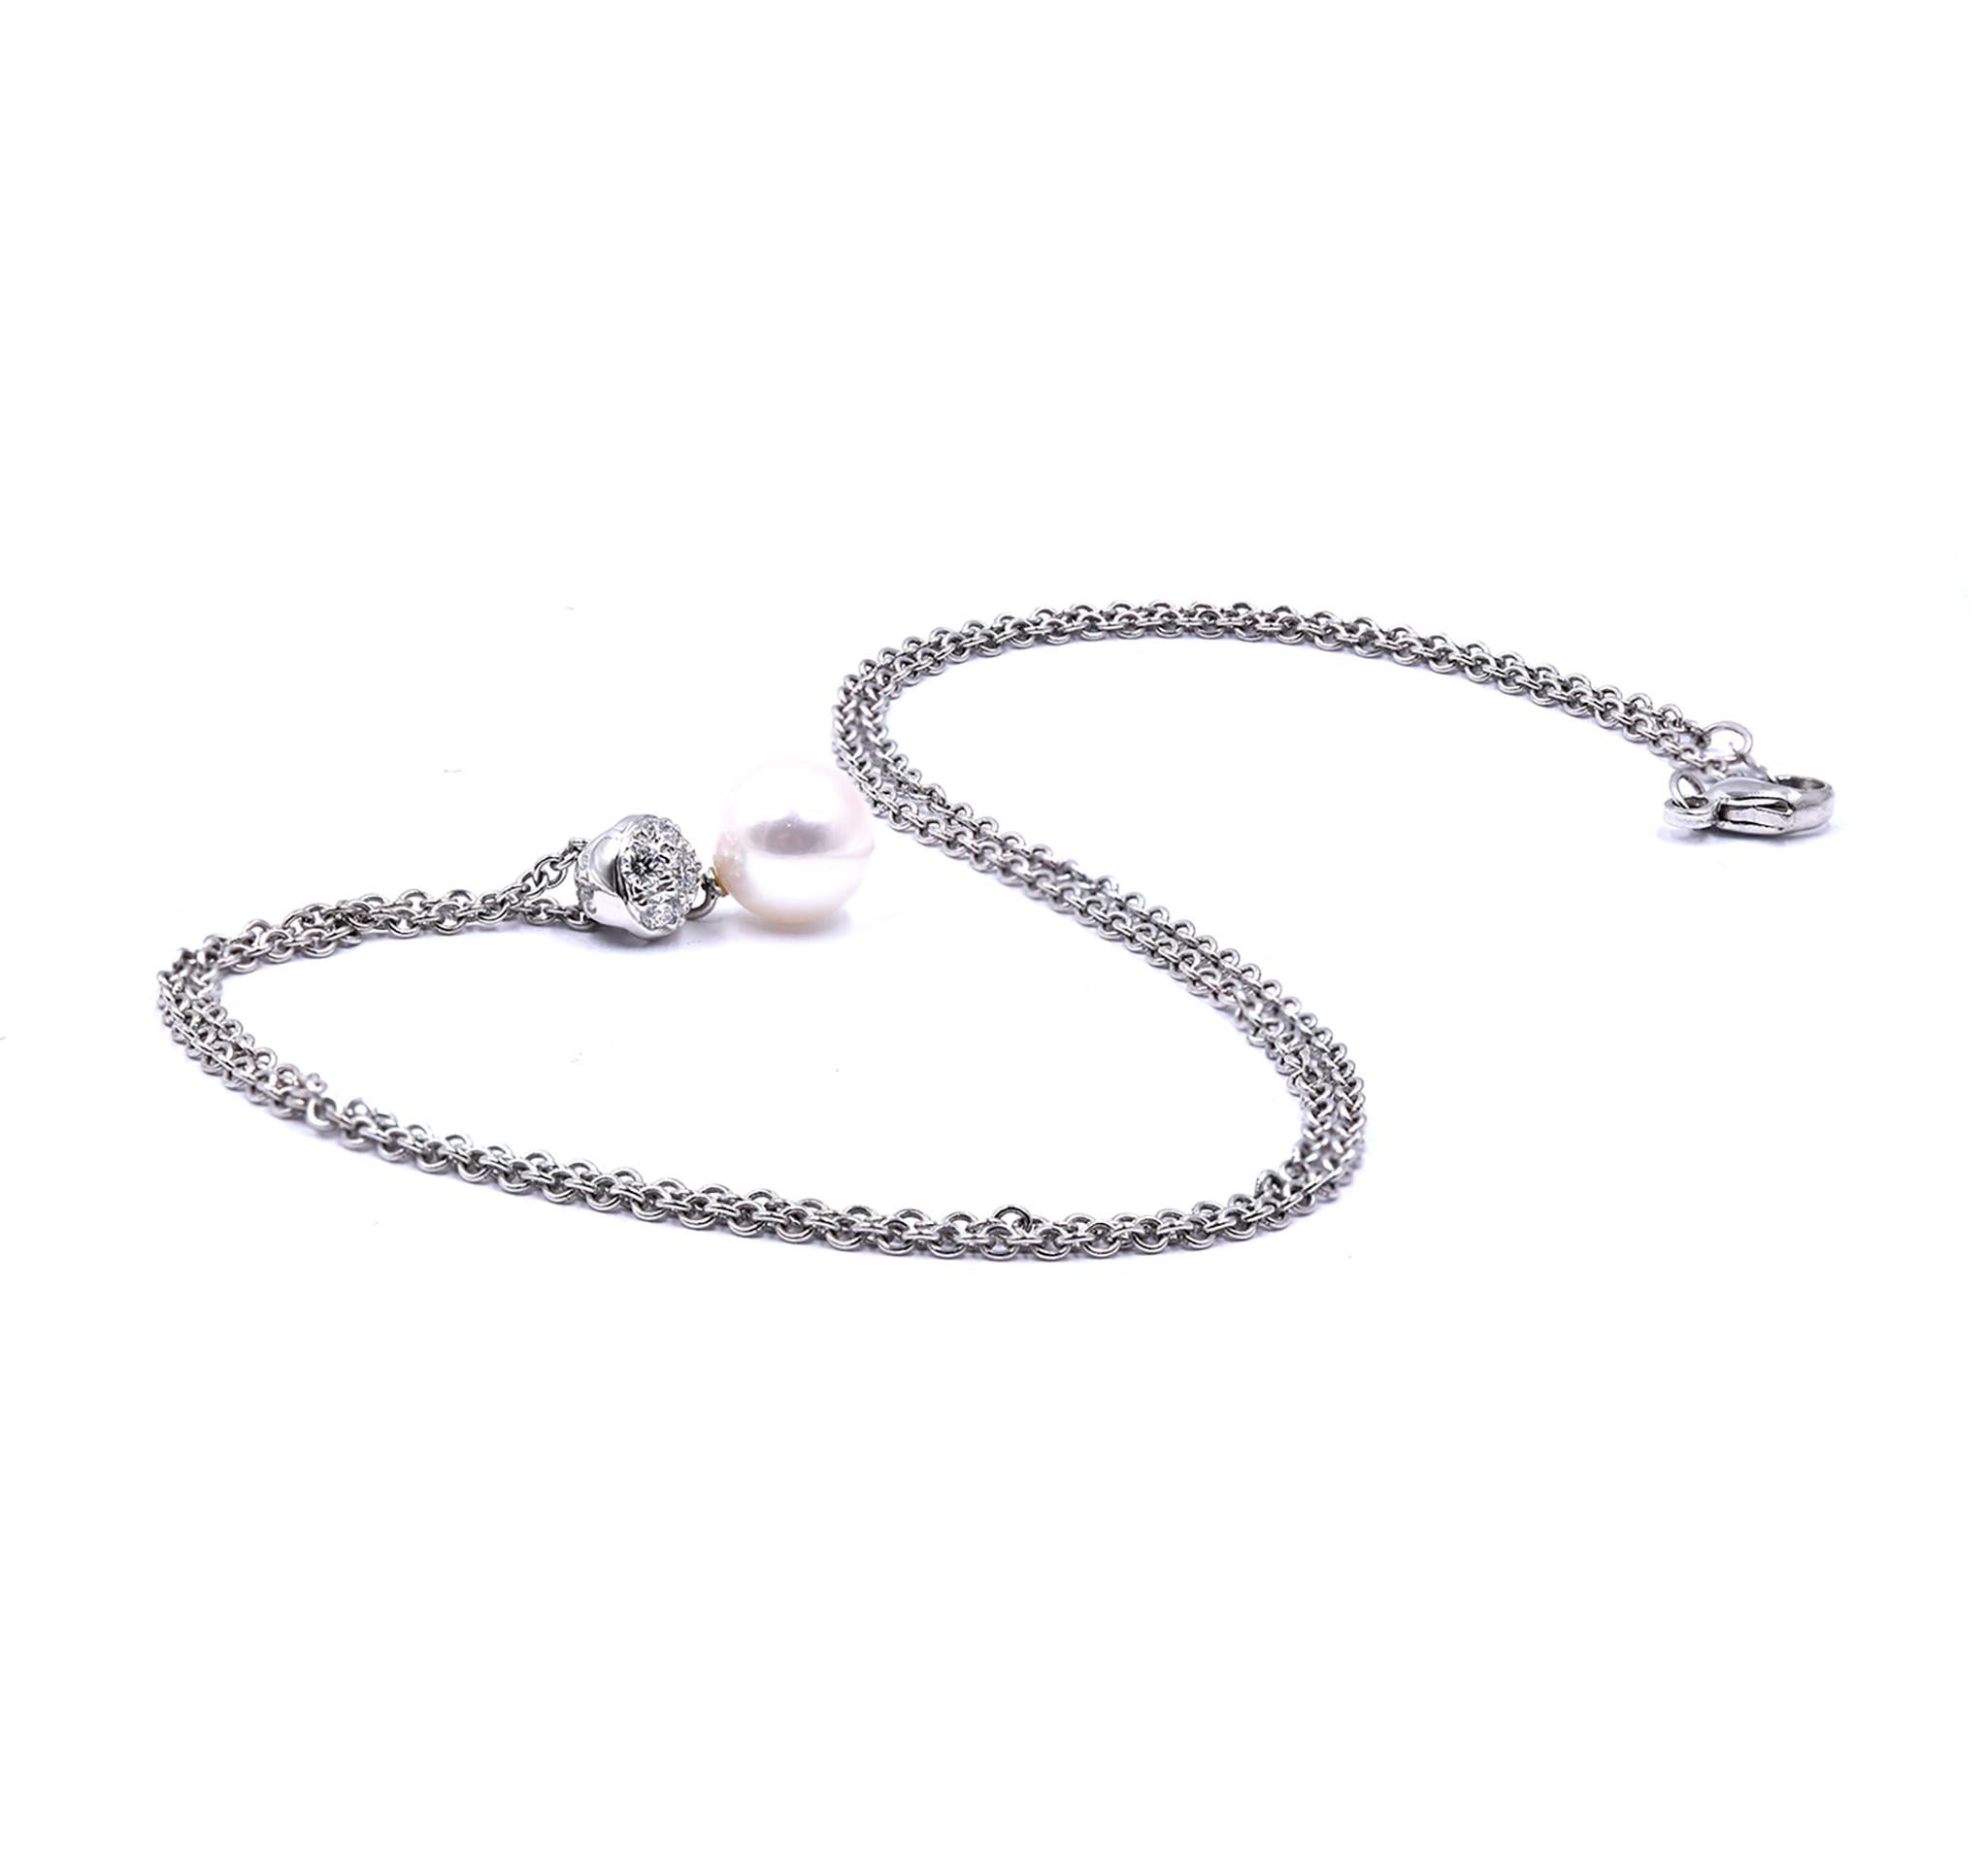 18 Karat White Gold Diamond and Pearl Drop Necklace In Excellent Condition For Sale In Scottsdale, AZ